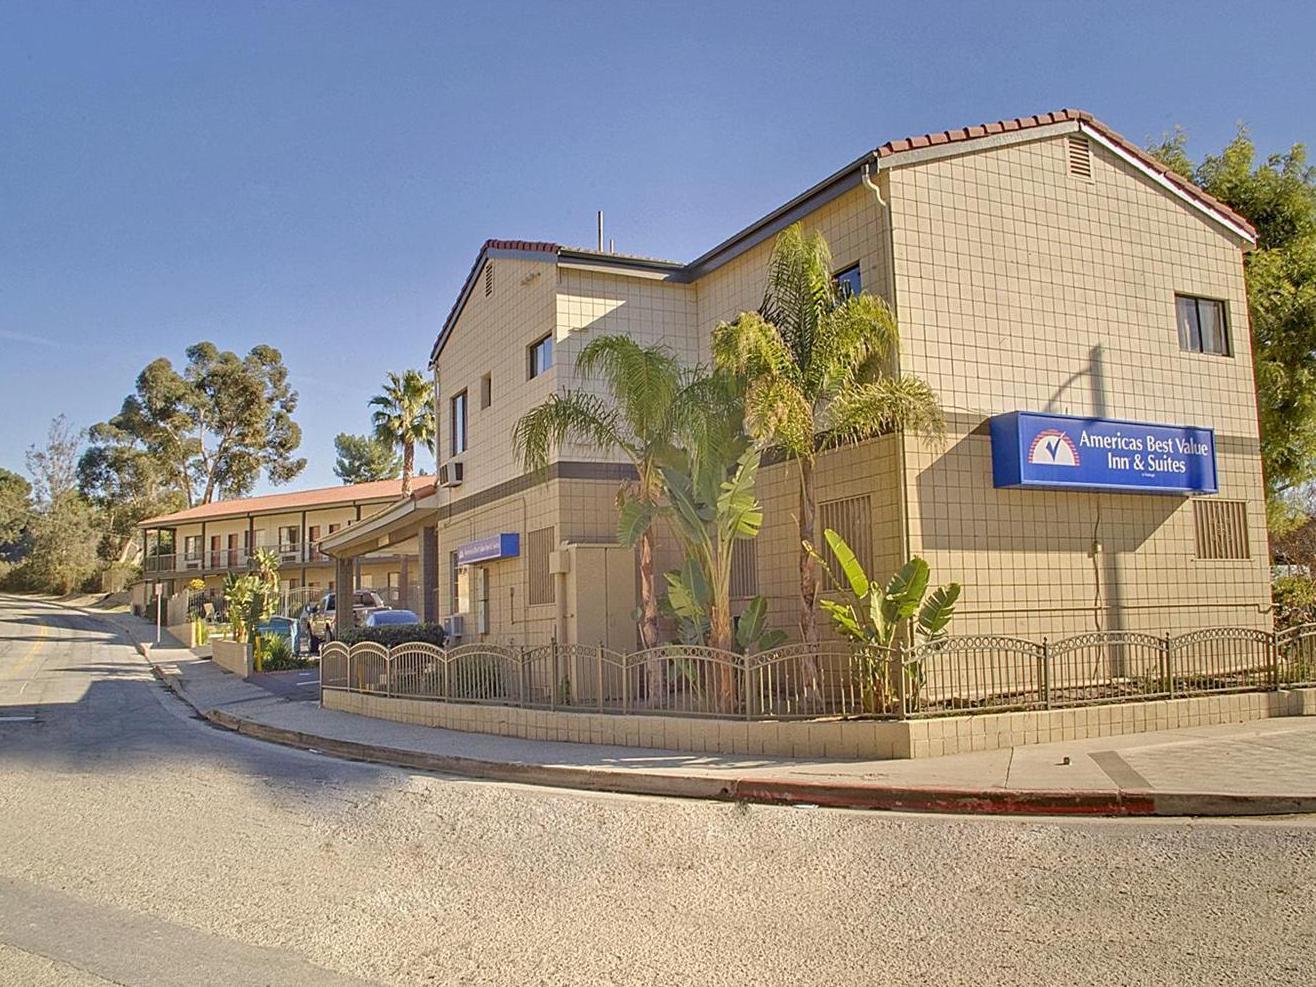 Americas Best Value Inn And Suites Los Angeles City of Los Angeles FAQ 2016, What facilities are there in Americas Best Value Inn And Suites Los Angeles City of Los Angeles 2016, What Languages Spoken are Supported in Americas Best Value Inn And Suites Los Angeles City of Los Angeles 2016, Which payment cards are accepted in Americas Best Value Inn And Suites Los Angeles City of Los Angeles , City of Los Angeles Americas Best Value Inn And Suites Los Angeles room facilities and services Q&A 2016, City of Los Angeles Americas Best Value Inn And Suites Los Angeles online booking services 2016, City of Los Angeles Americas Best Value Inn And Suites Los Angeles address 2016, City of Los Angeles Americas Best Value Inn And Suites Los Angeles telephone number 2016,City of Los Angeles Americas Best Value Inn And Suites Los Angeles map 2016, City of Los Angeles Americas Best Value Inn And Suites Los Angeles traffic guide 2016, how to go City of Los Angeles Americas Best Value Inn And Suites Los Angeles, City of Los Angeles Americas Best Value Inn And Suites Los Angeles booking online 2016, City of Los Angeles Americas Best Value Inn And Suites Los Angeles room types 2016.